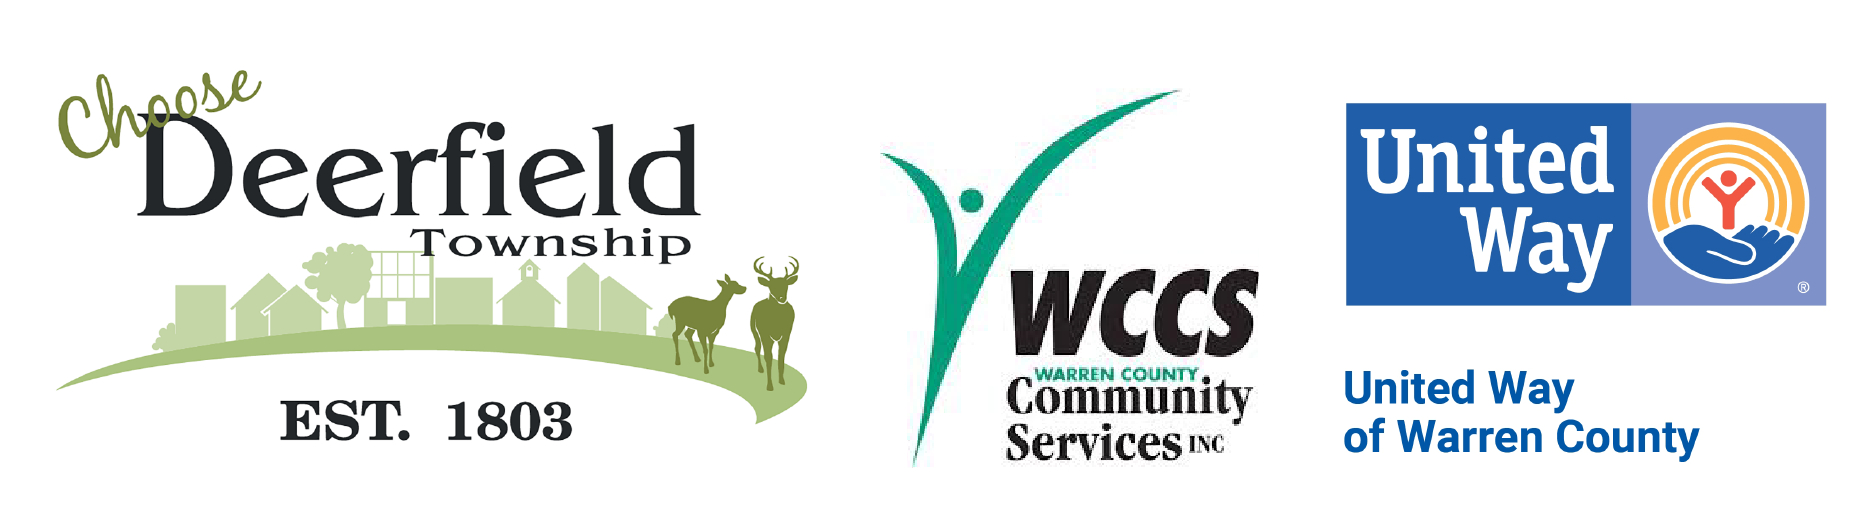 Logos for Deerfield Township, Warren County Community Services, and Warren County United Way